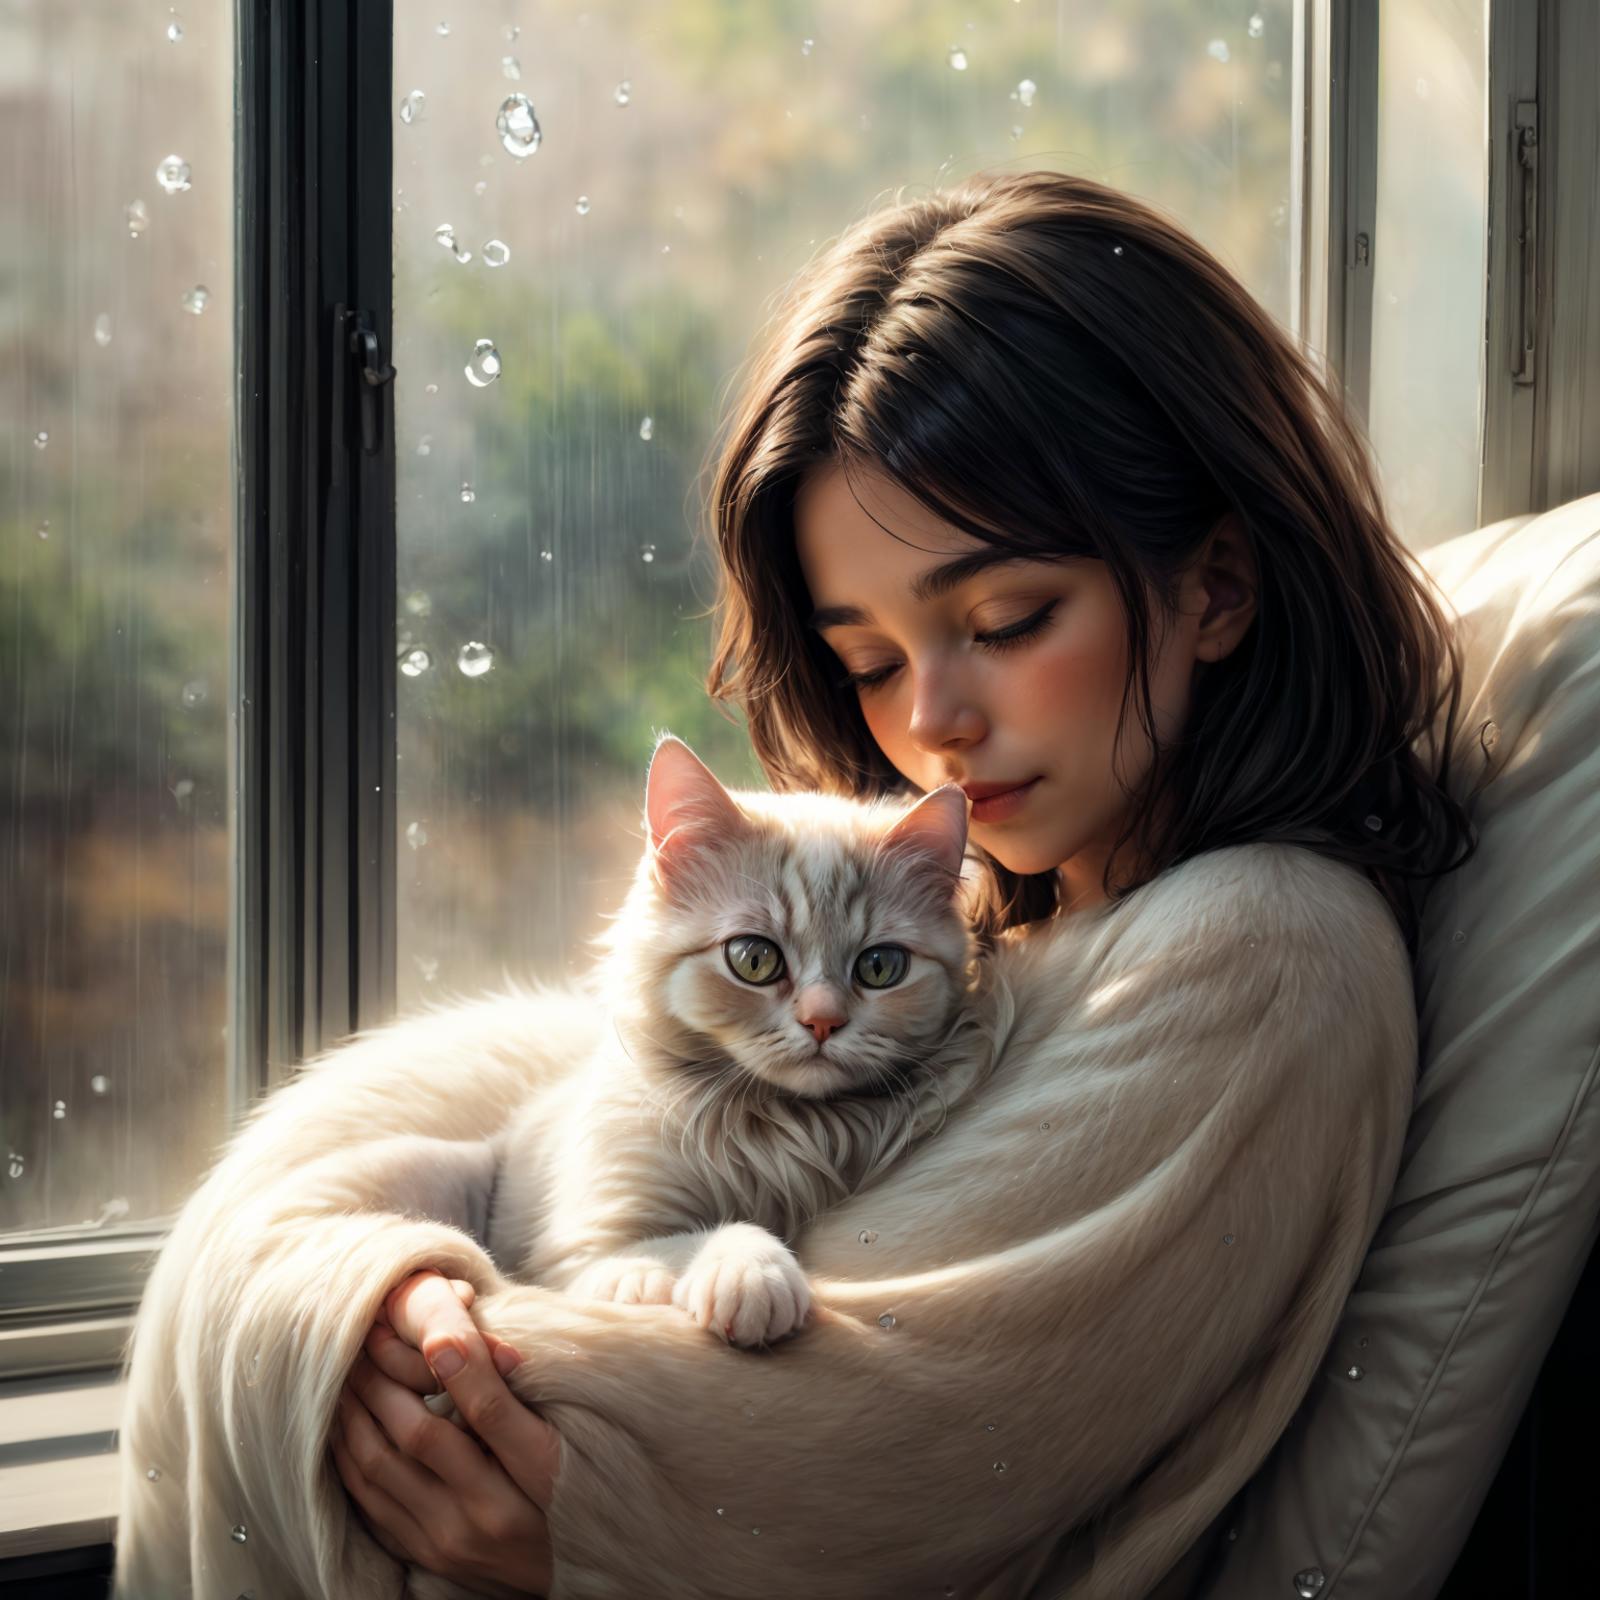 Woman holding a cat by a window, wearing a white sweater.